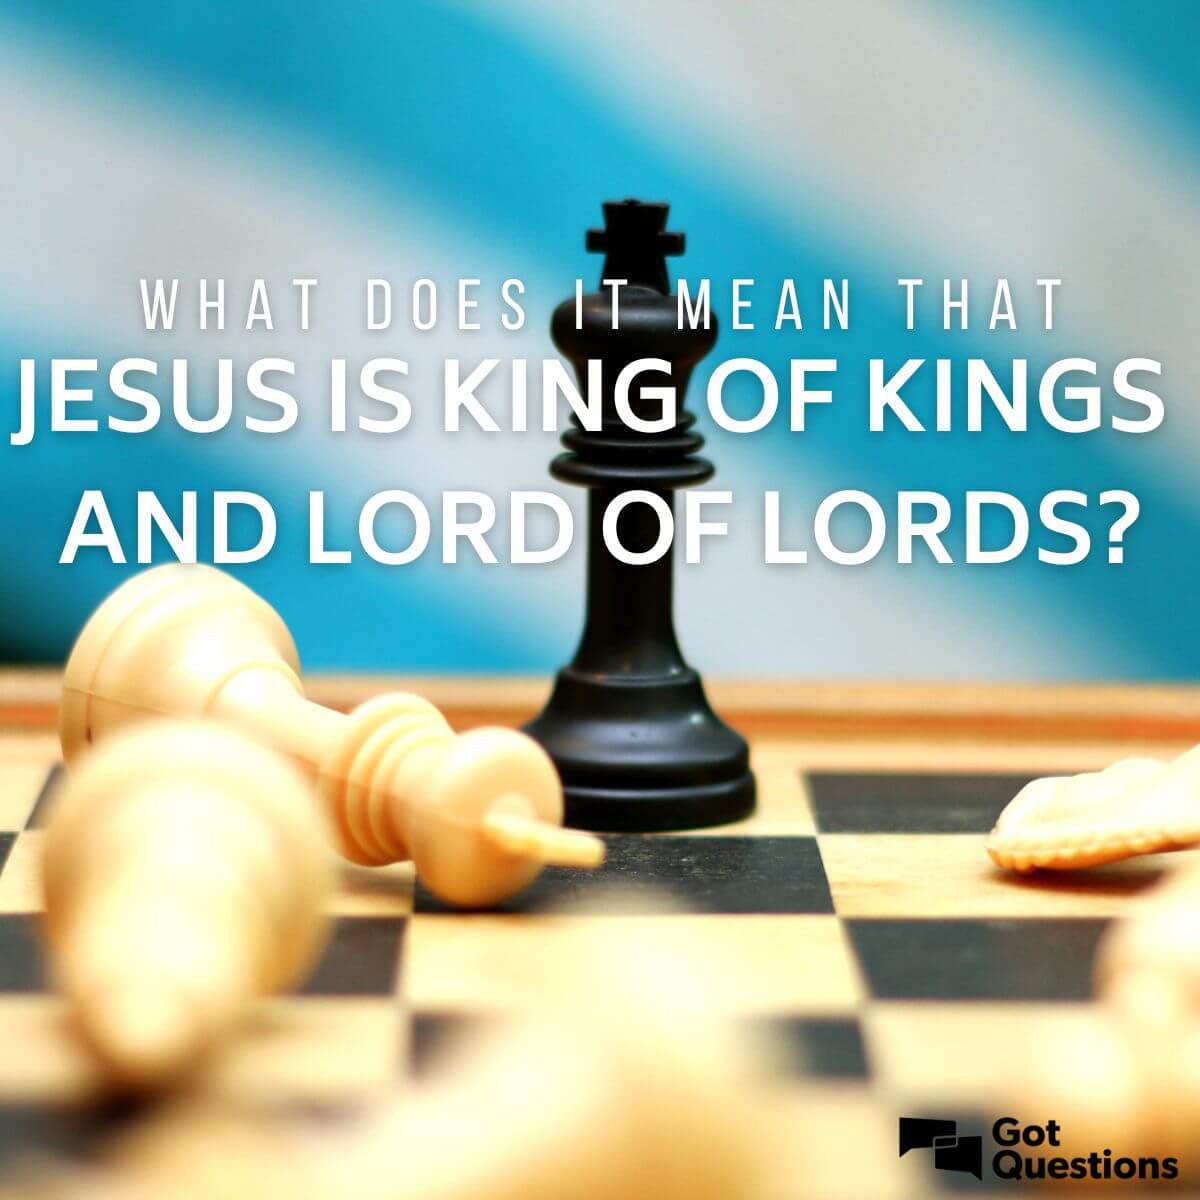 What Does It Mean That Jesus Is King Of Kings And Lord Of Lords